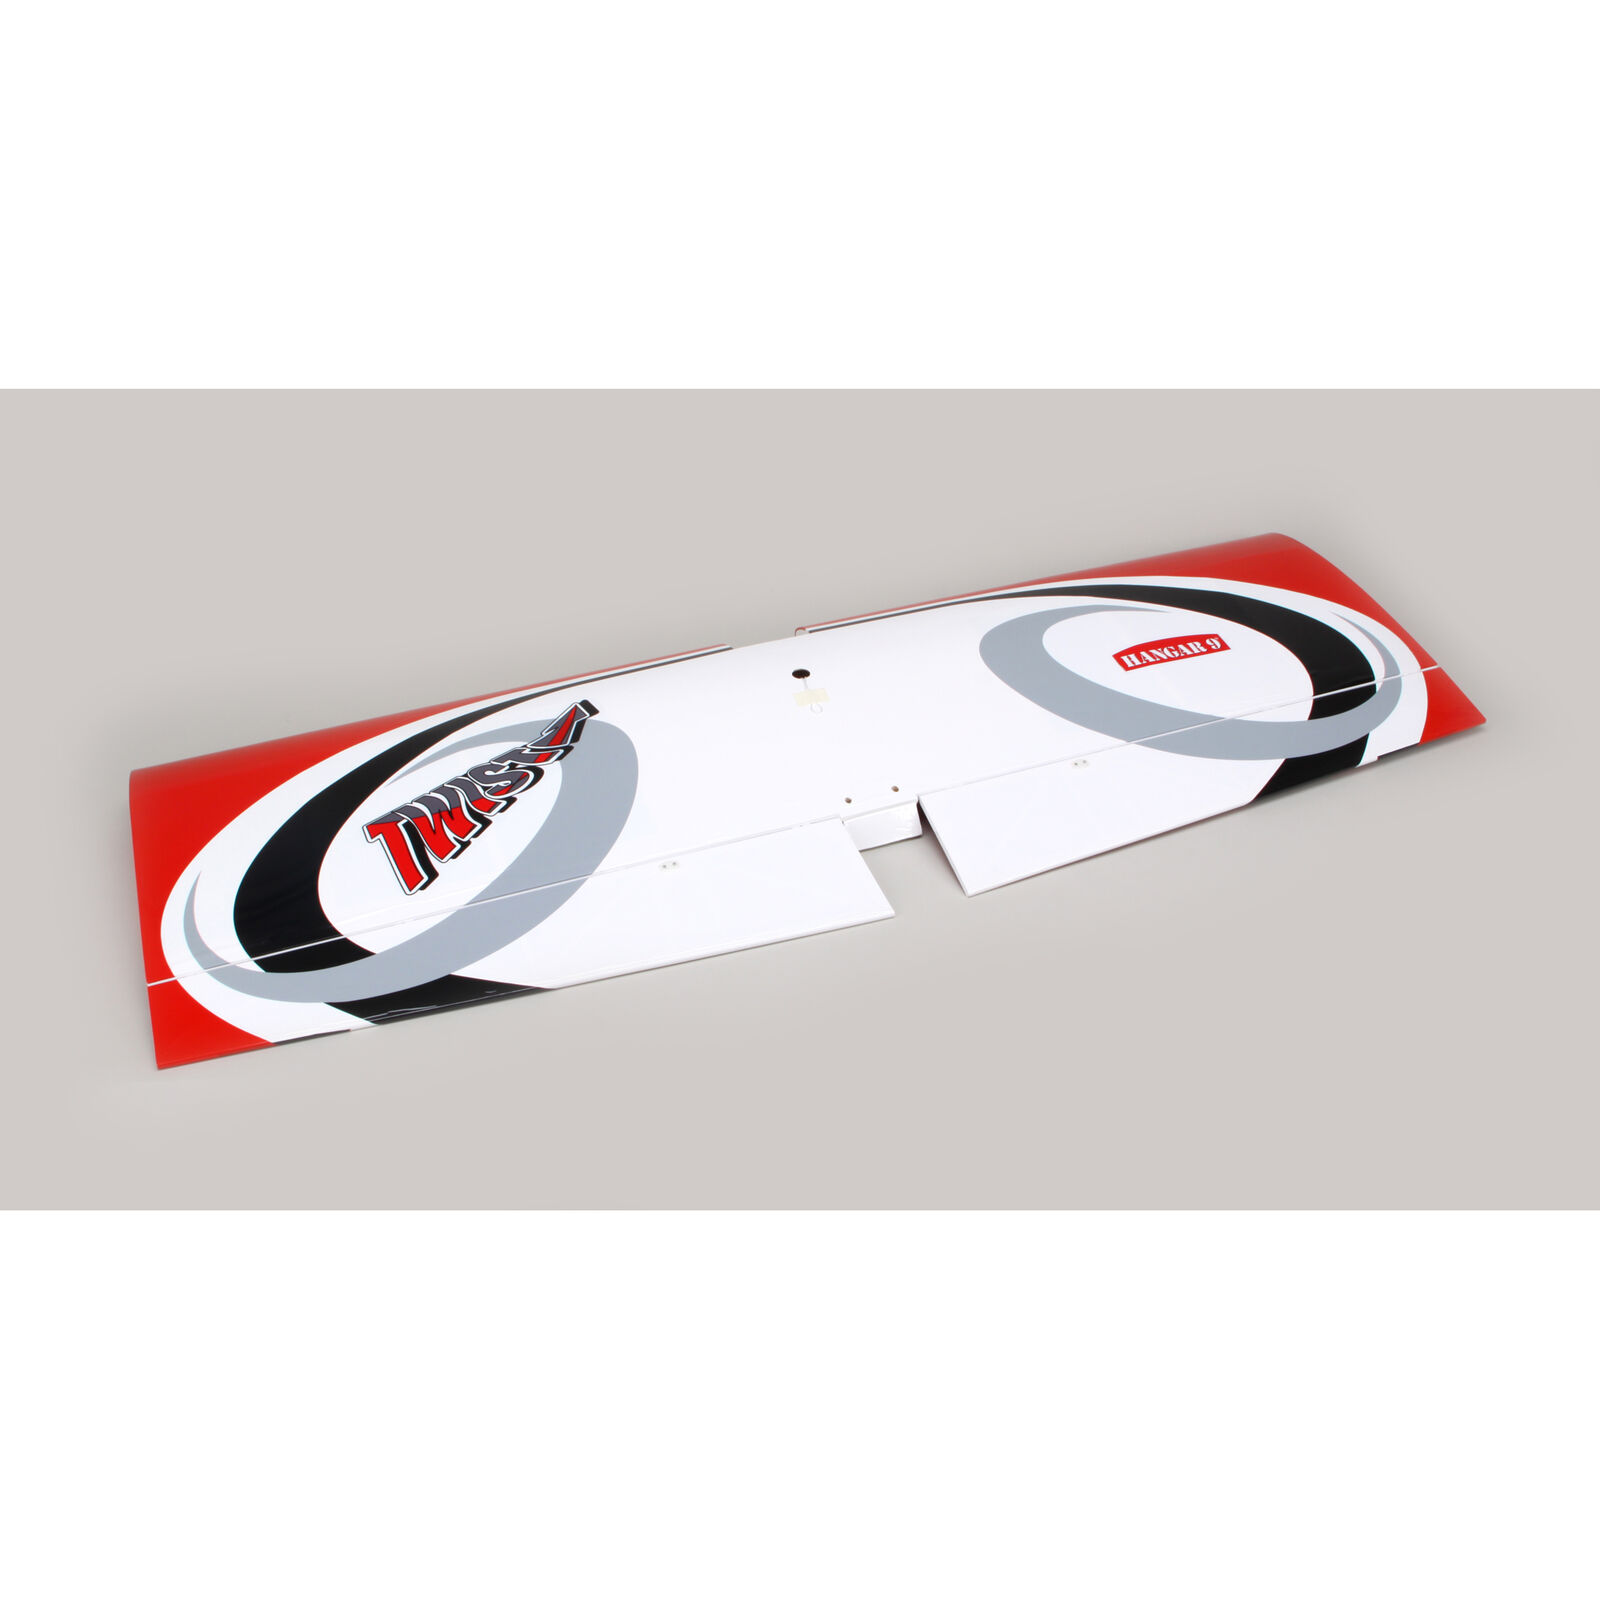 Twist 60 (True Red) Wing Set with Ailerons